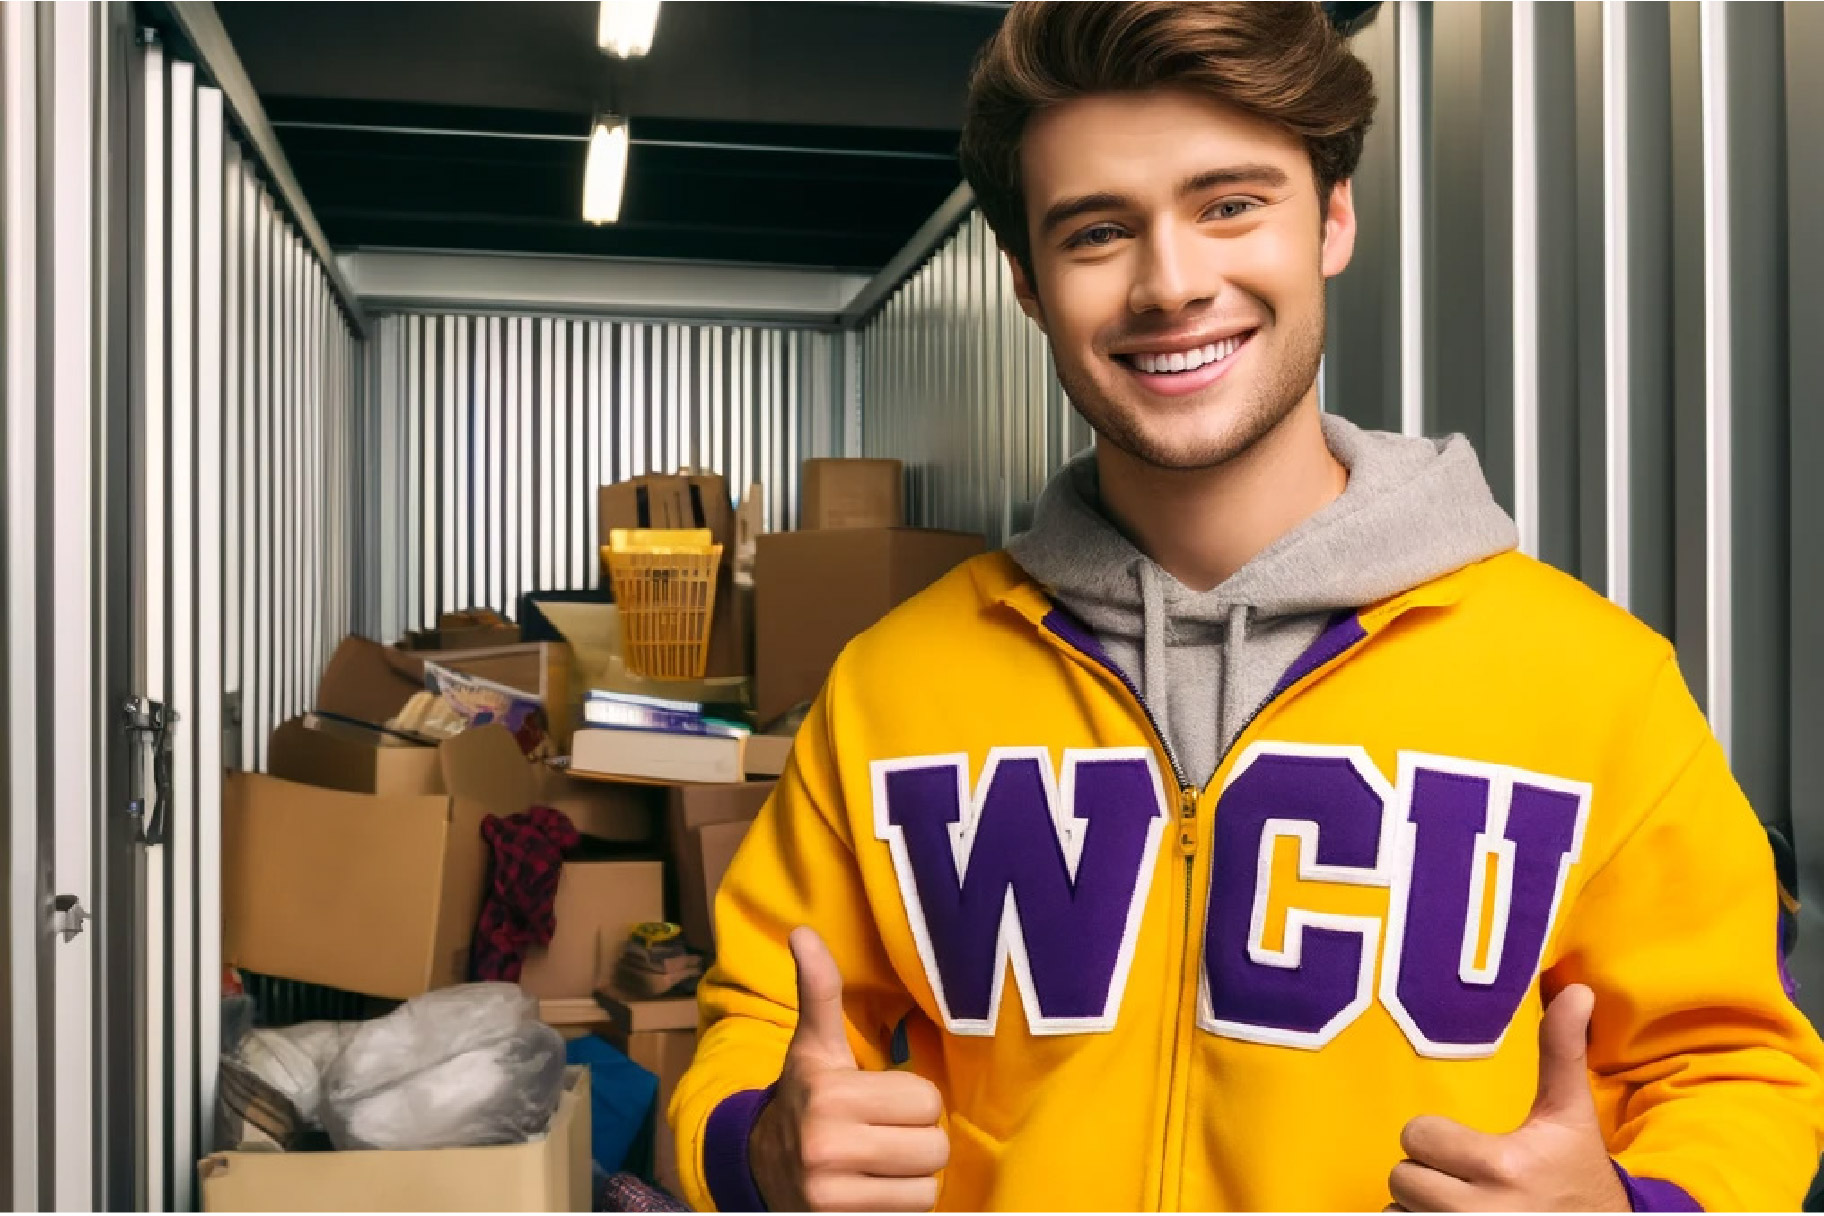 West Chester University student in front of self-storage unit